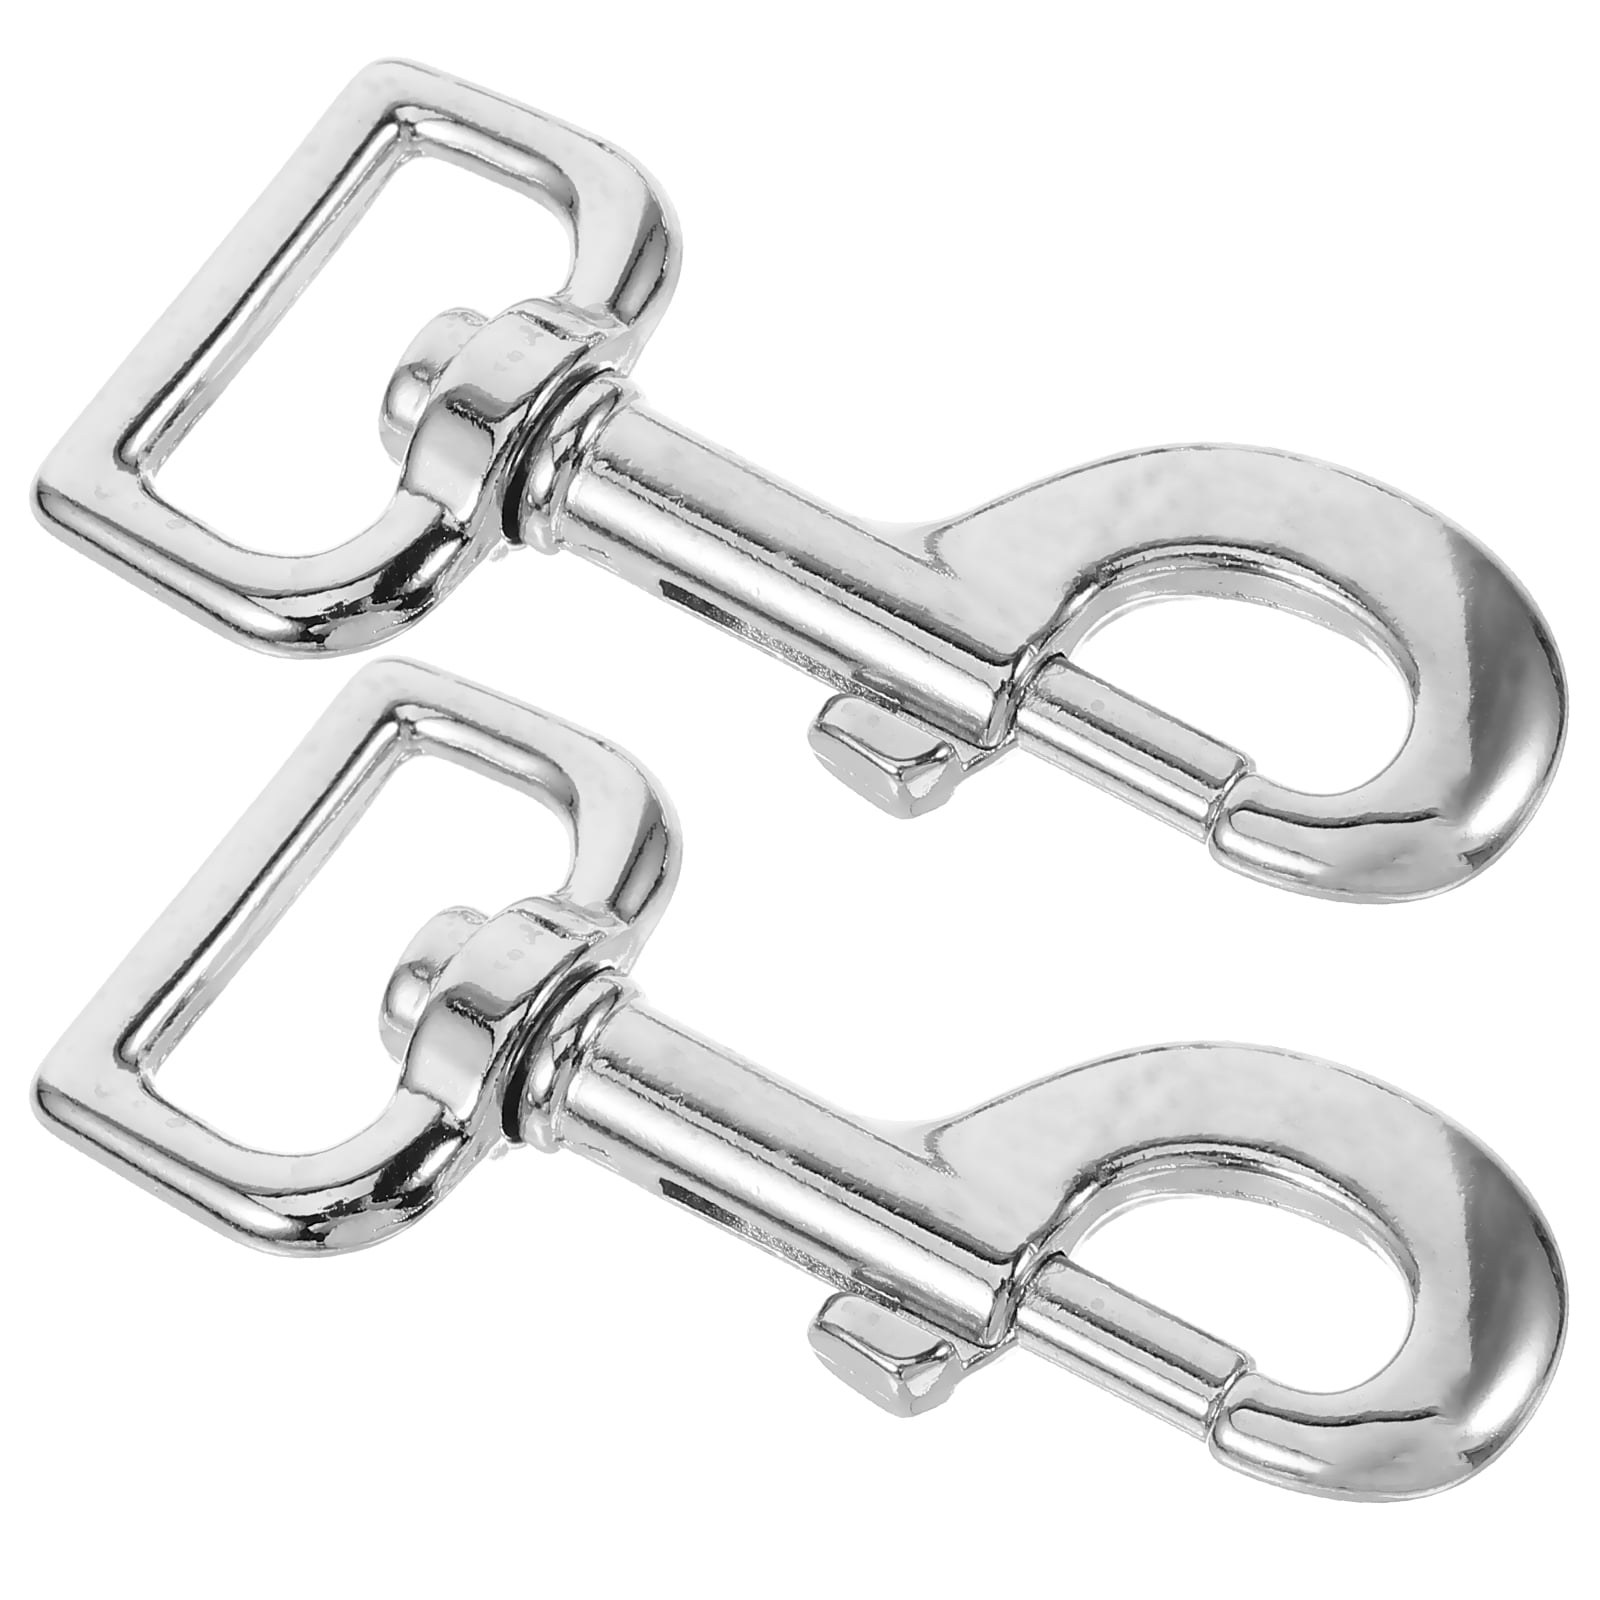 2pcs Swivel Snap Hooks Metal Dog Leash Clasp Pet Chain Connector Buckle for  Linking 